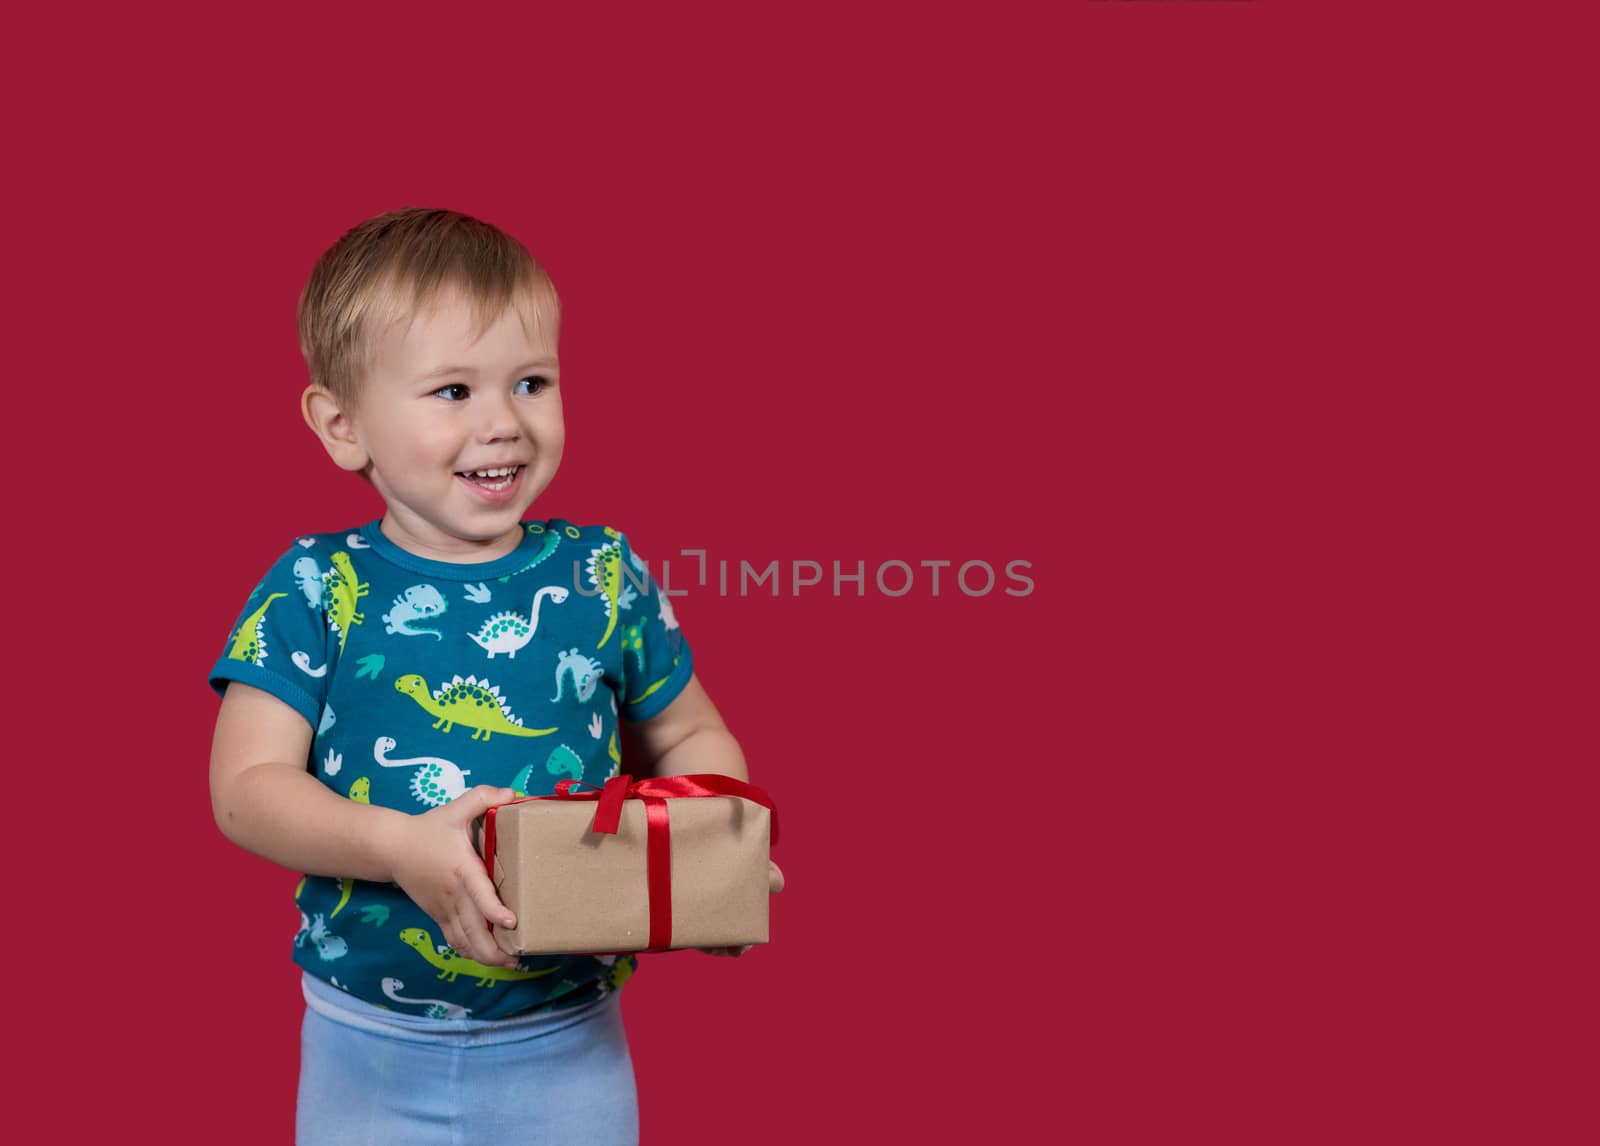 A little boy tries to unpack a New Year's gift with enthusiasm and excitement looking aside smiling on a red background